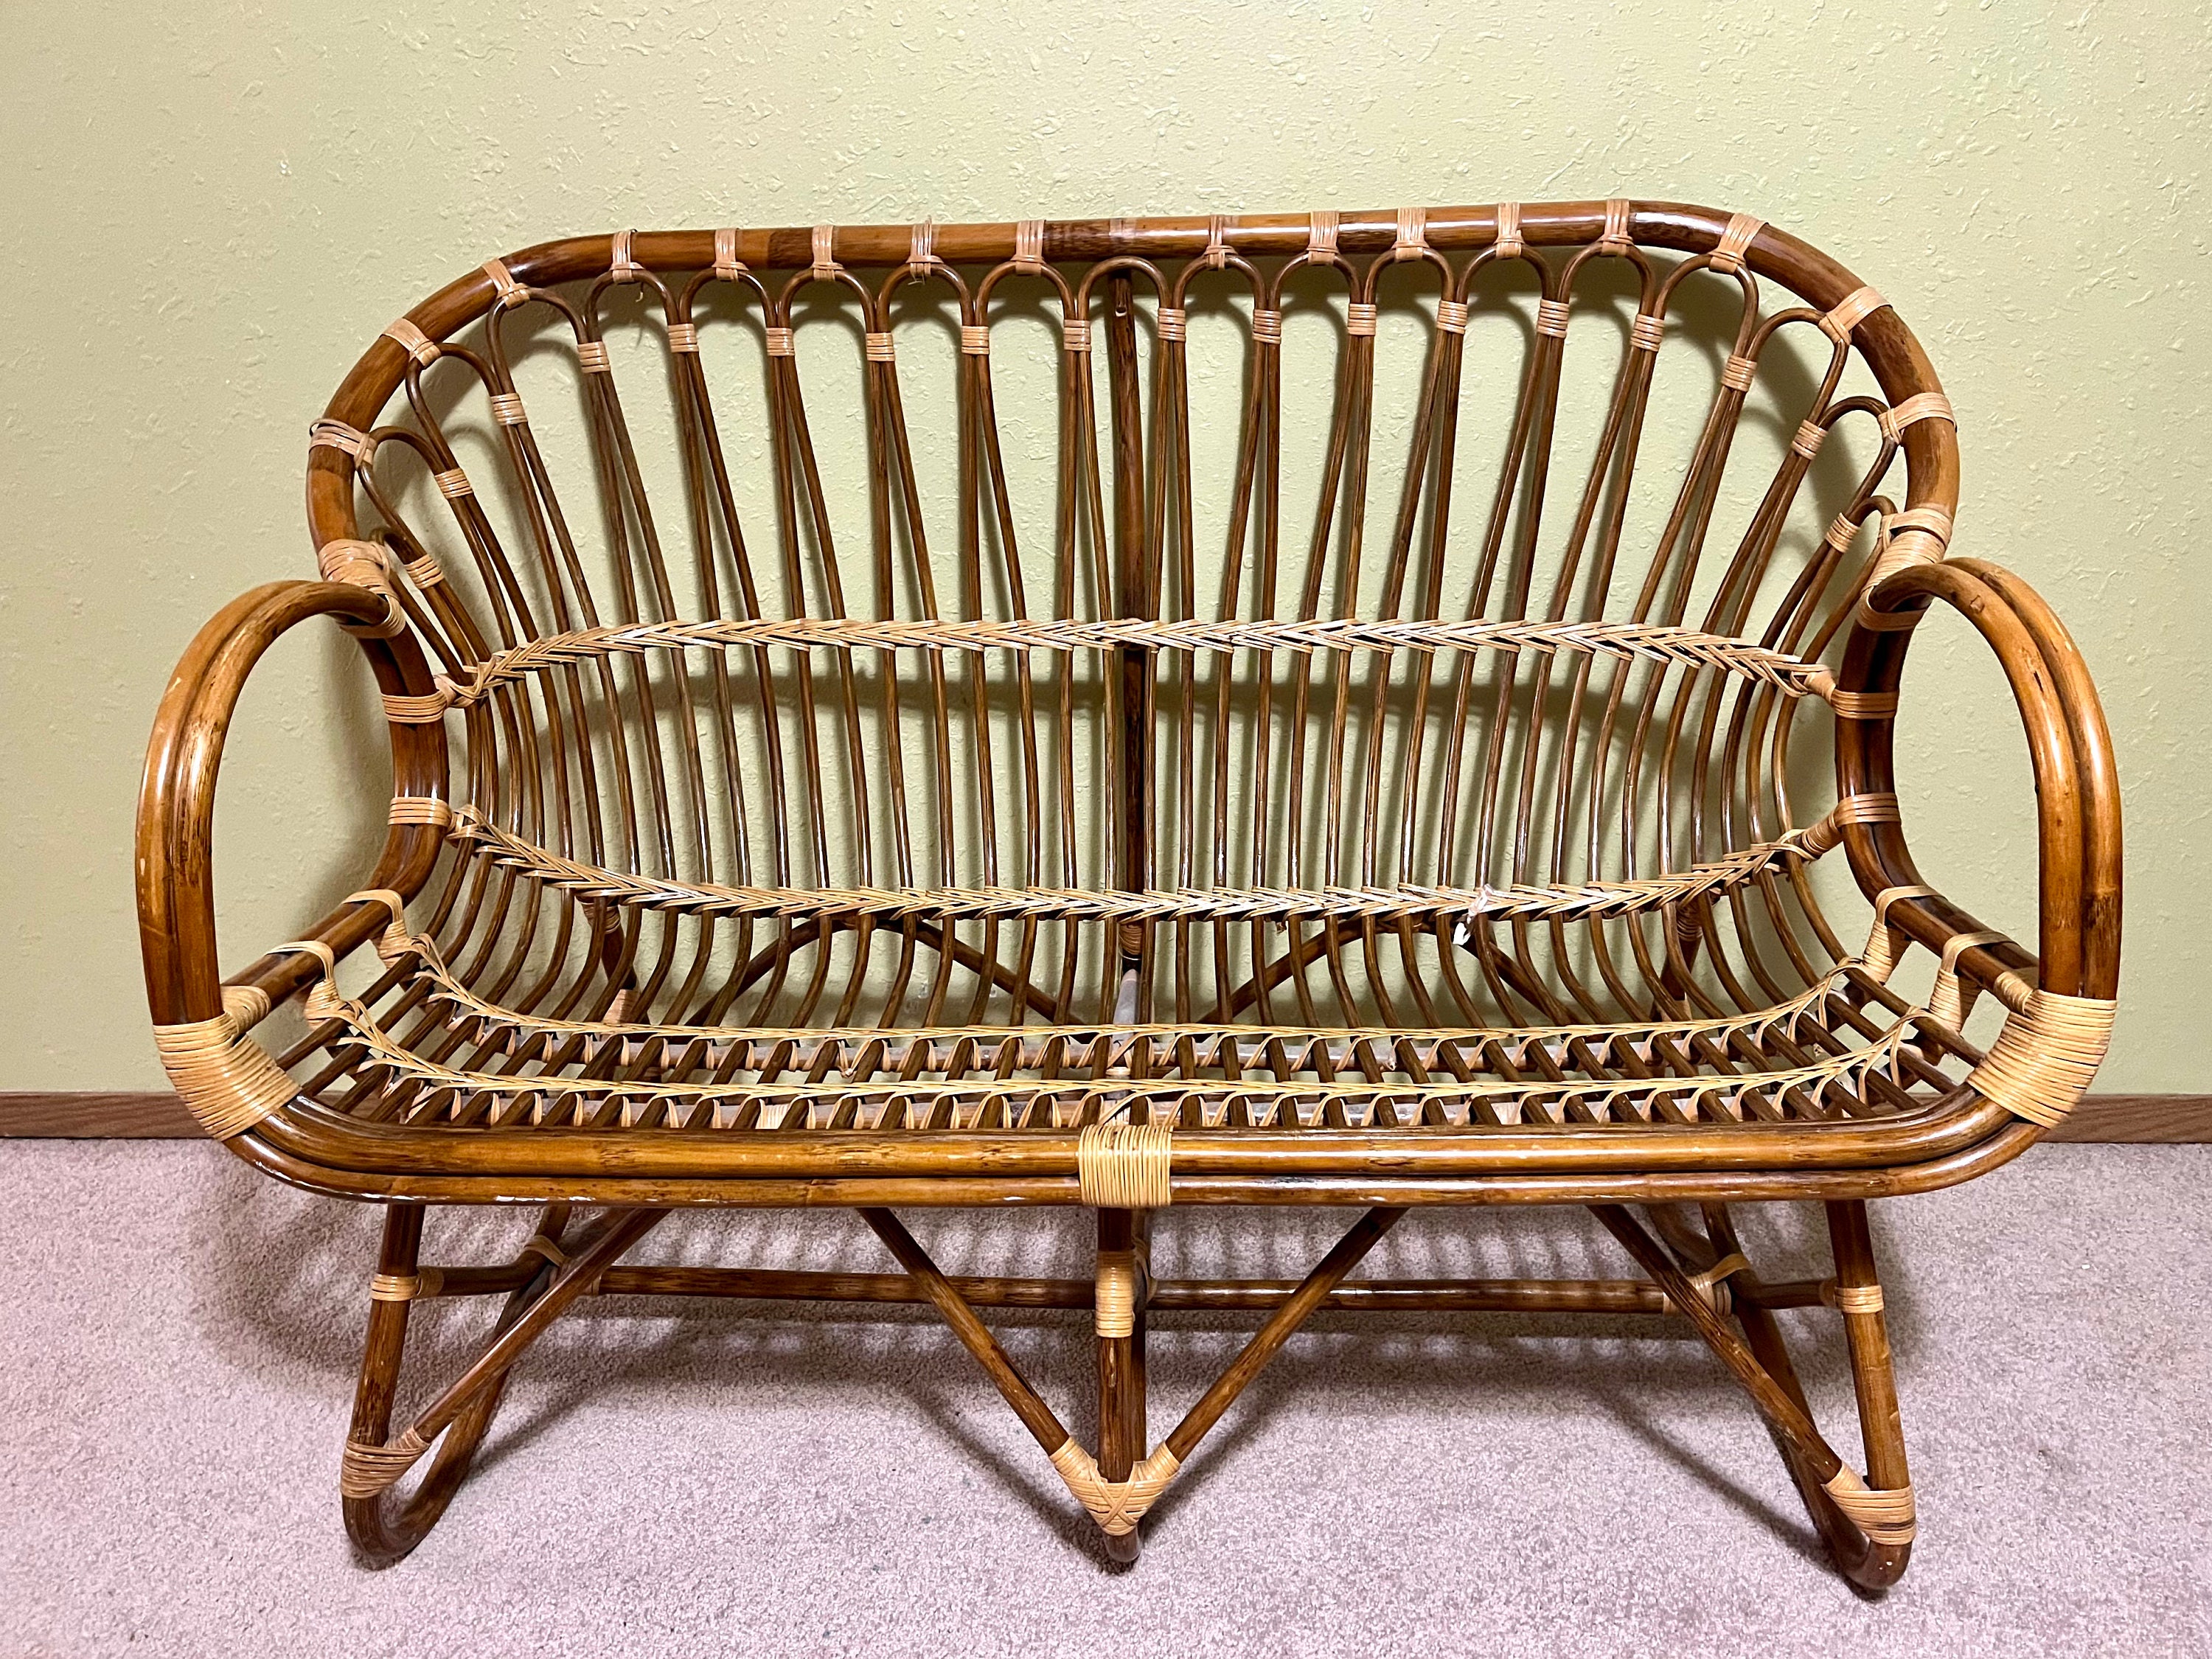 Rattan - Couch Vintage Etsy